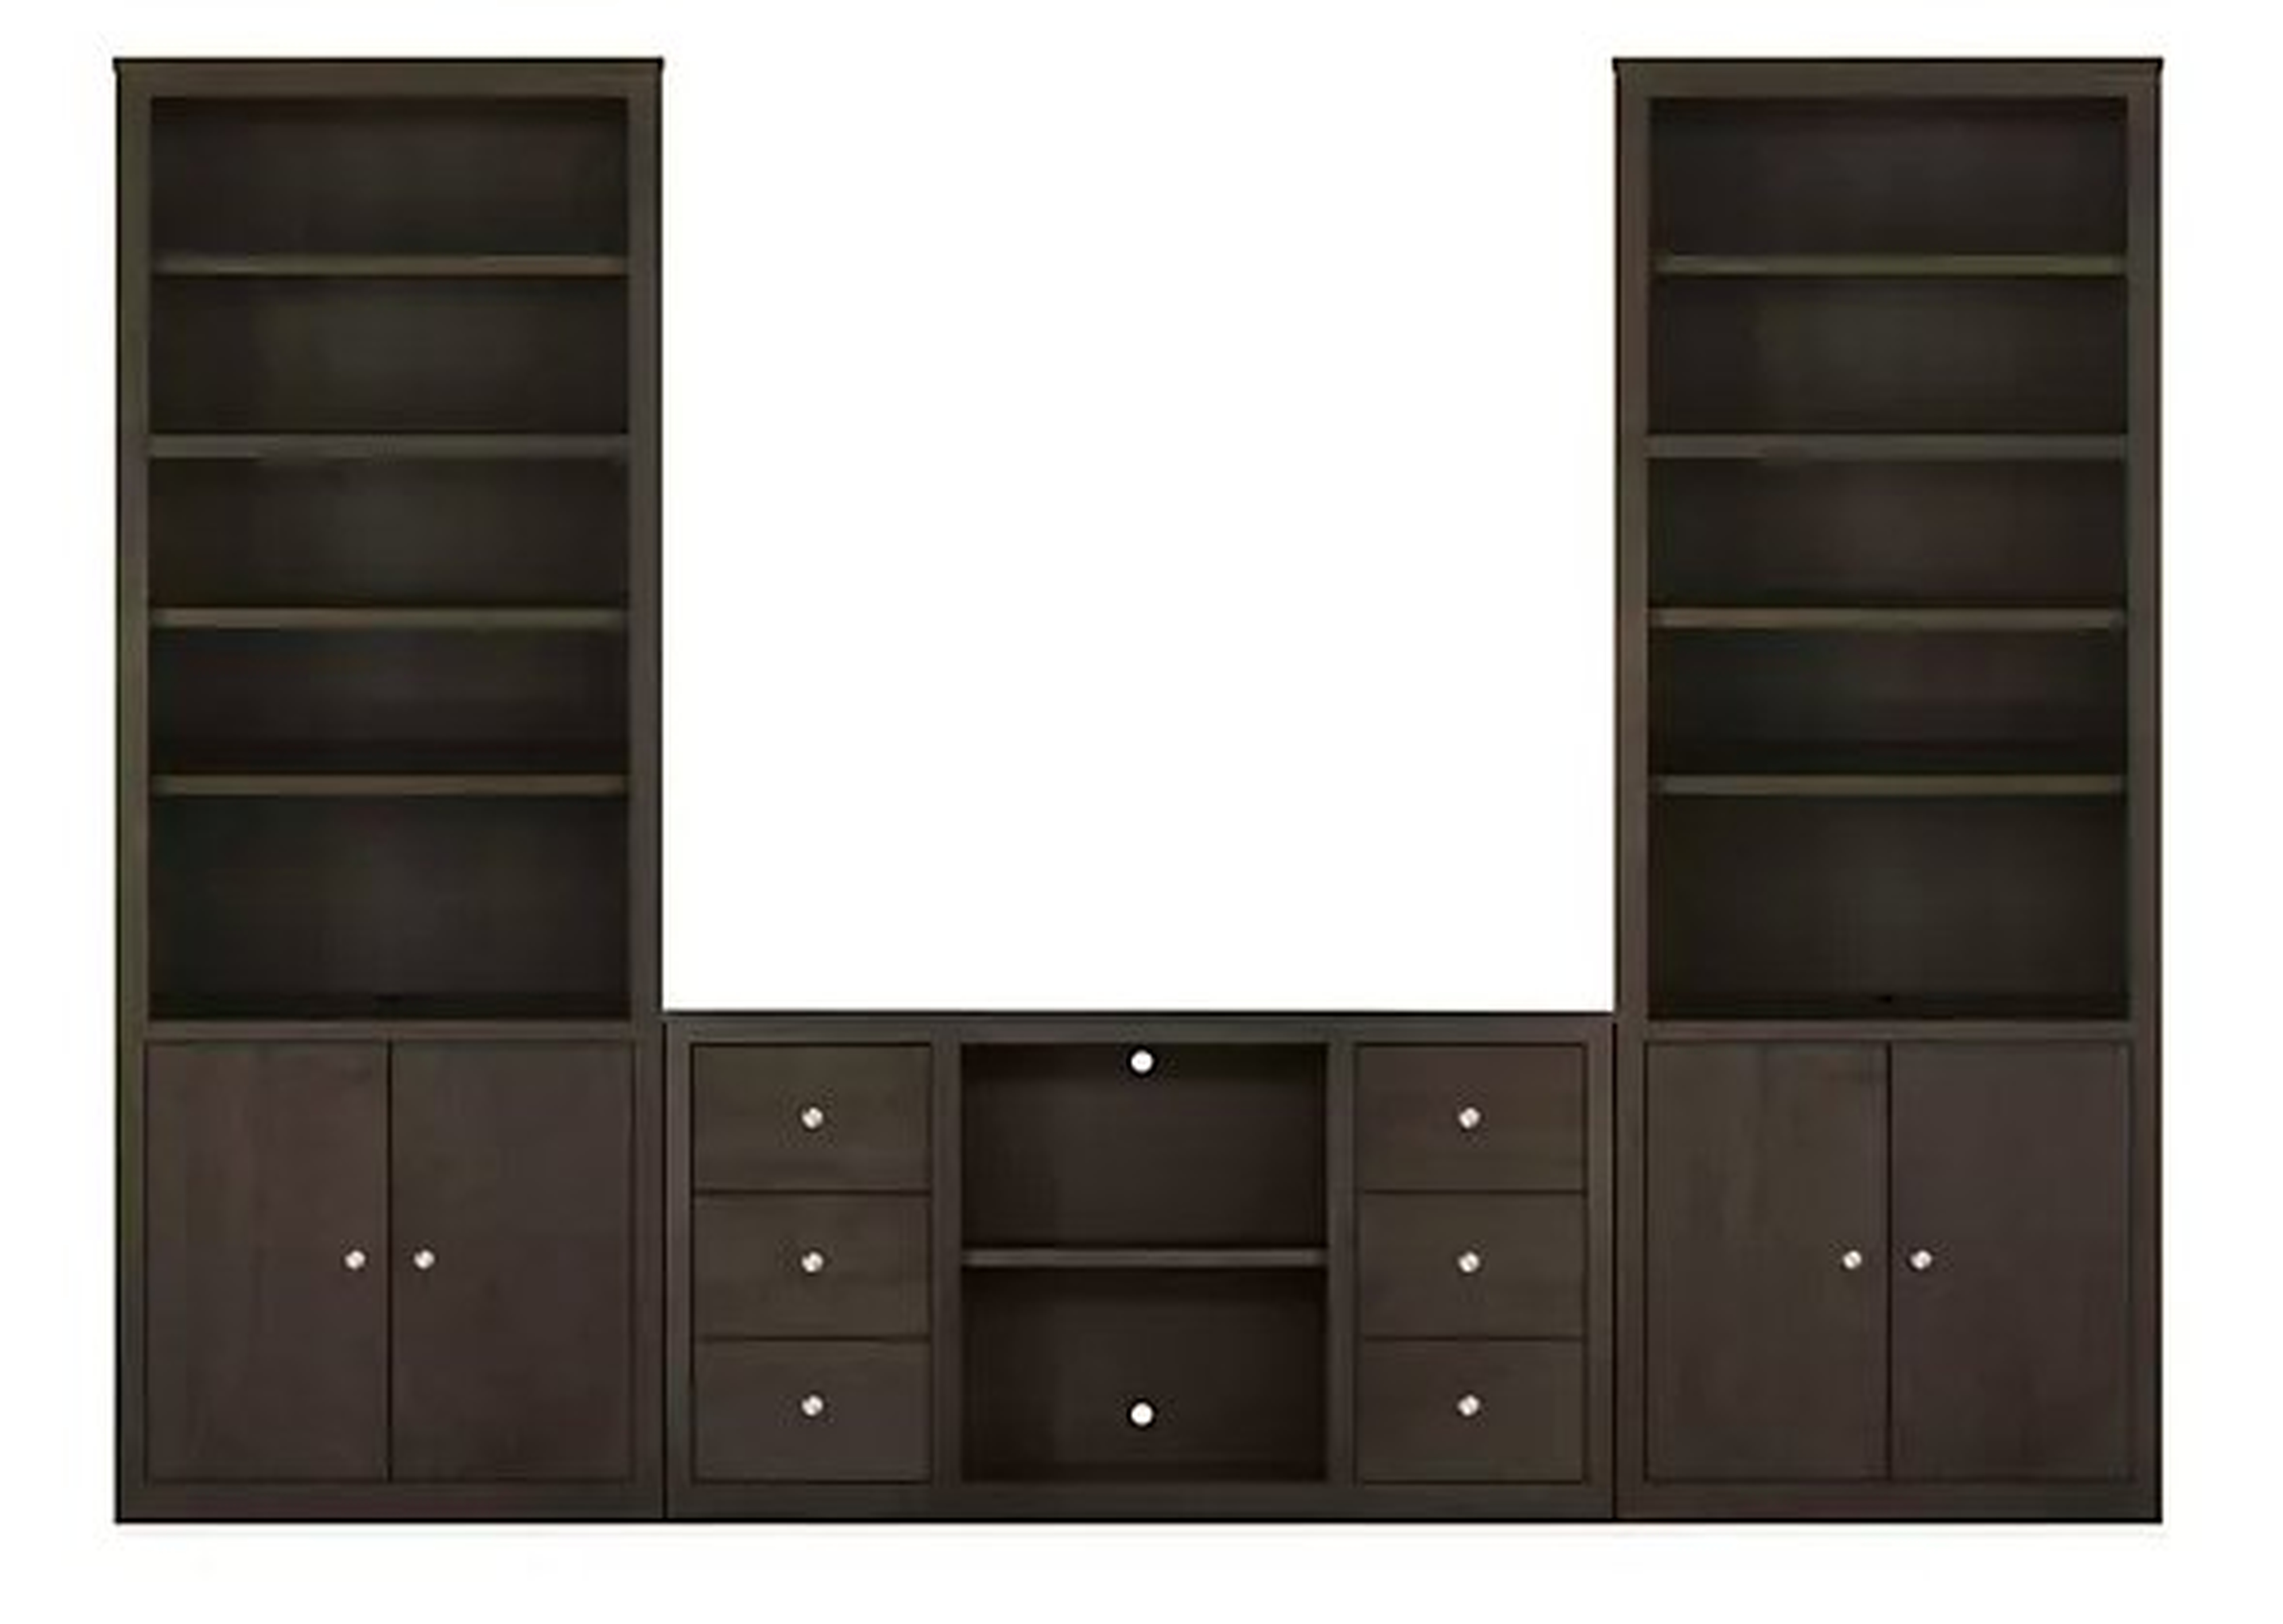 Woodwind Media Cabinets Maple with charcoal stain - Room & Board